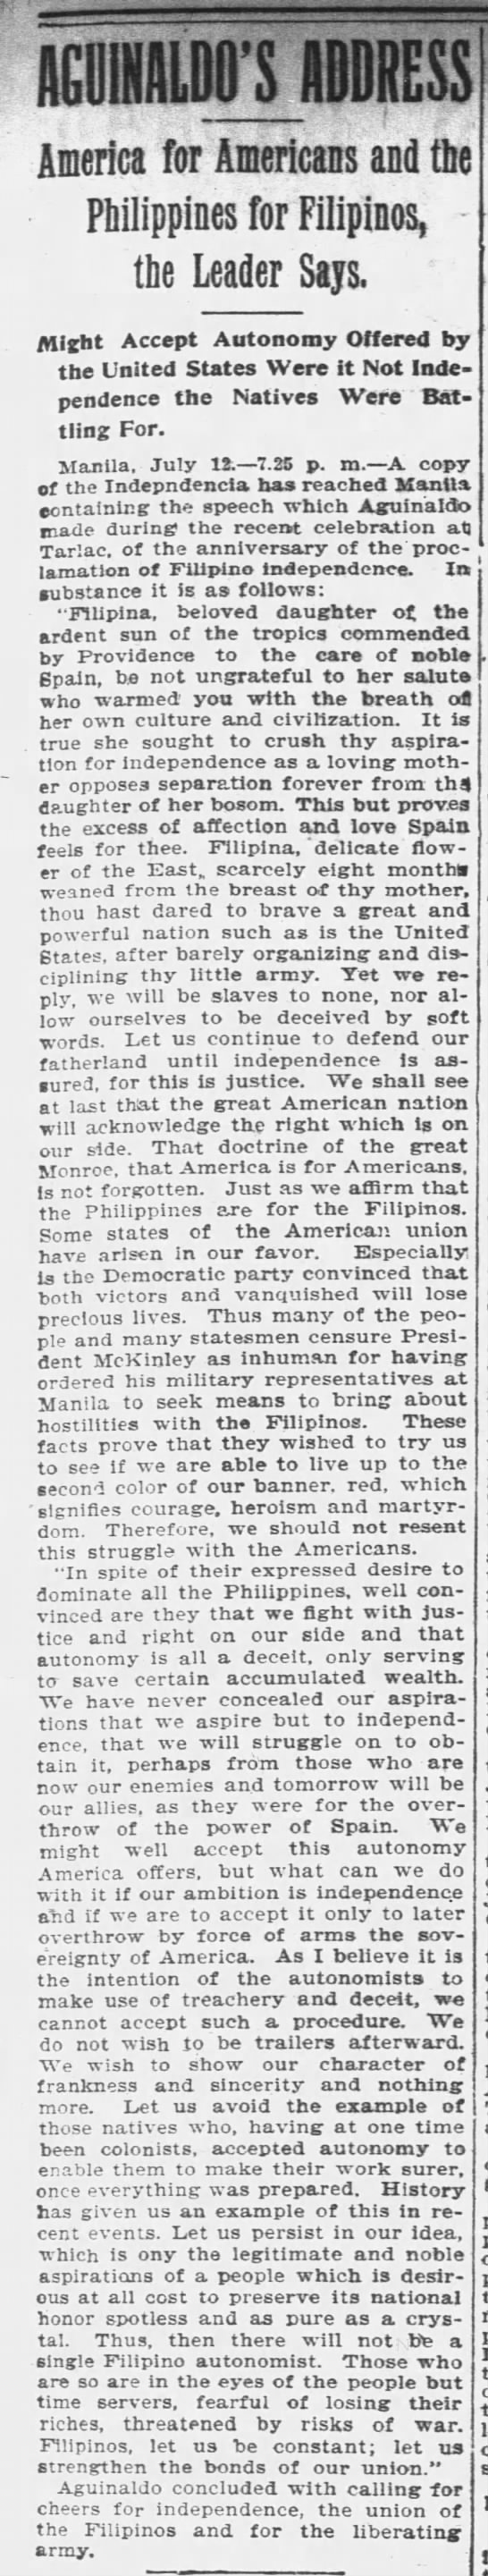 Newspaper prints copy of a speech by Emilio Aguinaldo about Philippine independence - 